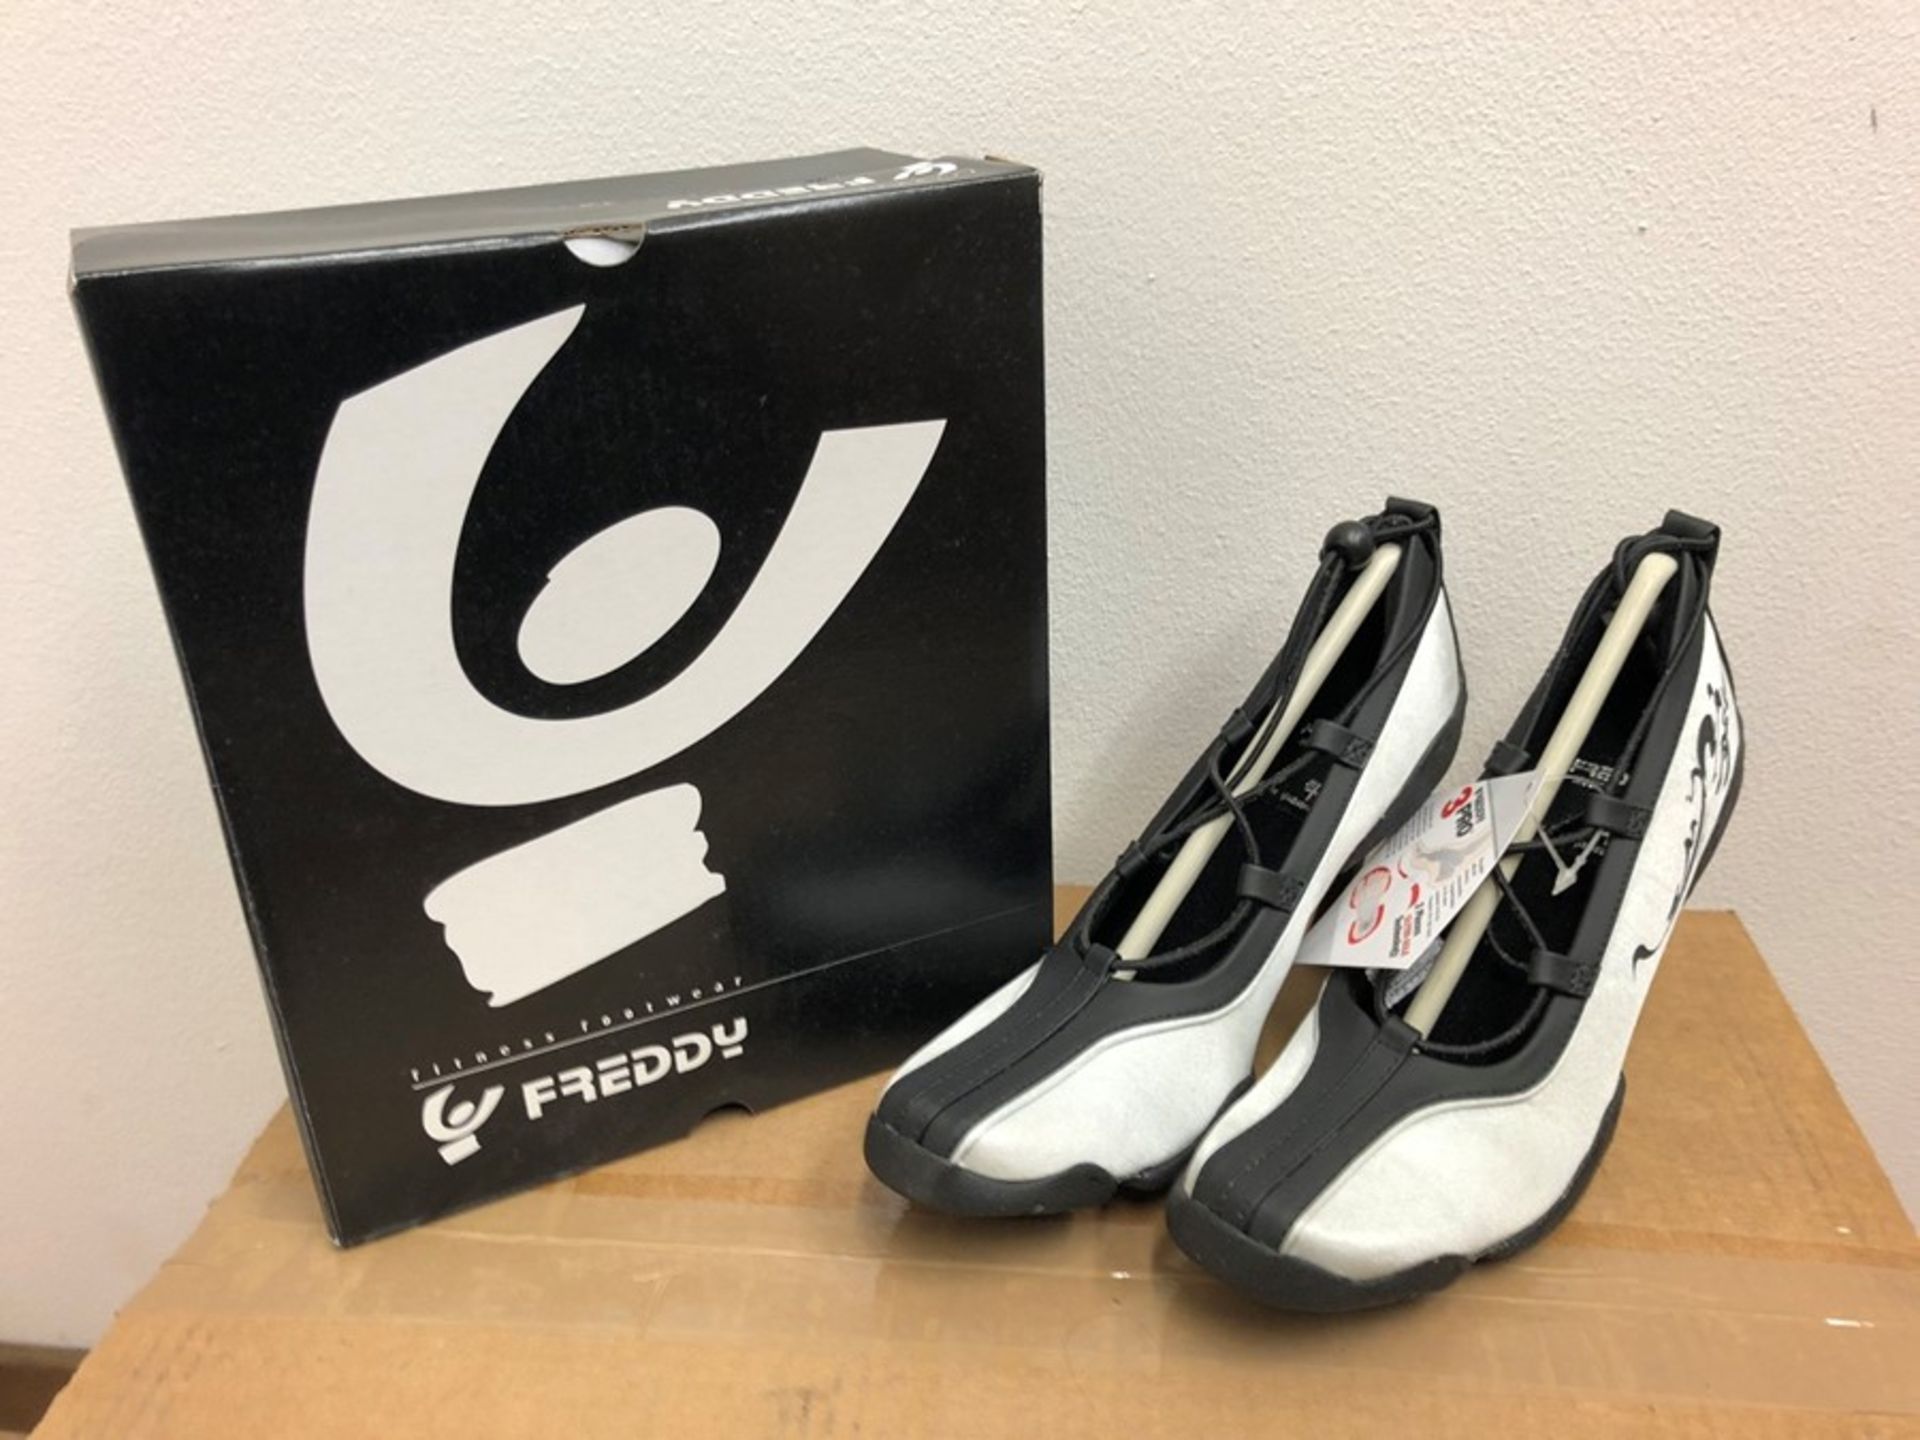 1 BOXED PAIR OF FREDDY 3 PRO FITNESS SPORTS HEELS IN SILVER AND BLACK / SIZE 5.5 IN LADIES / RRP £